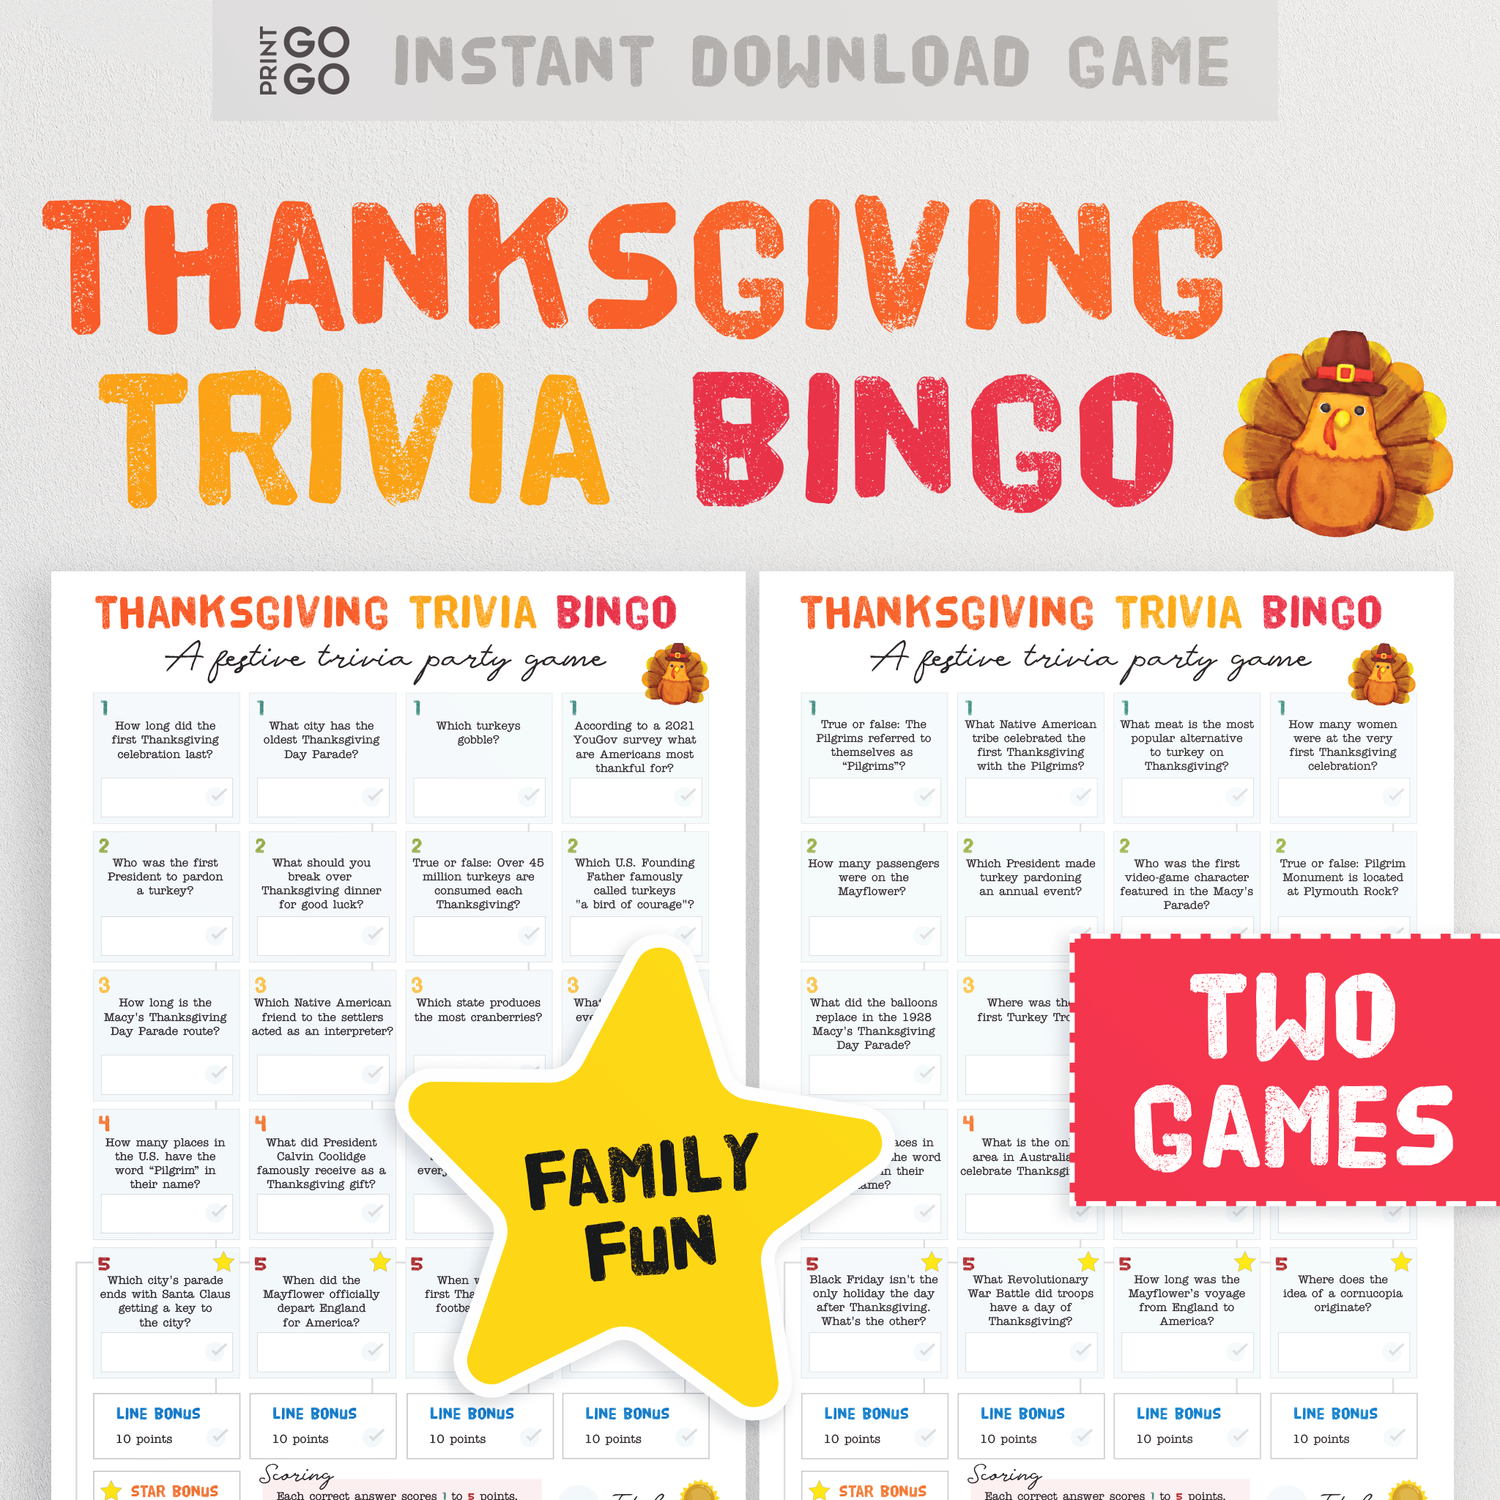 Thanksgiving Trivia Bingo - Test Your Holiday Knowledge With This Fun Family Quiz Party Game | USA Holiday Quiz Questions | Group Game